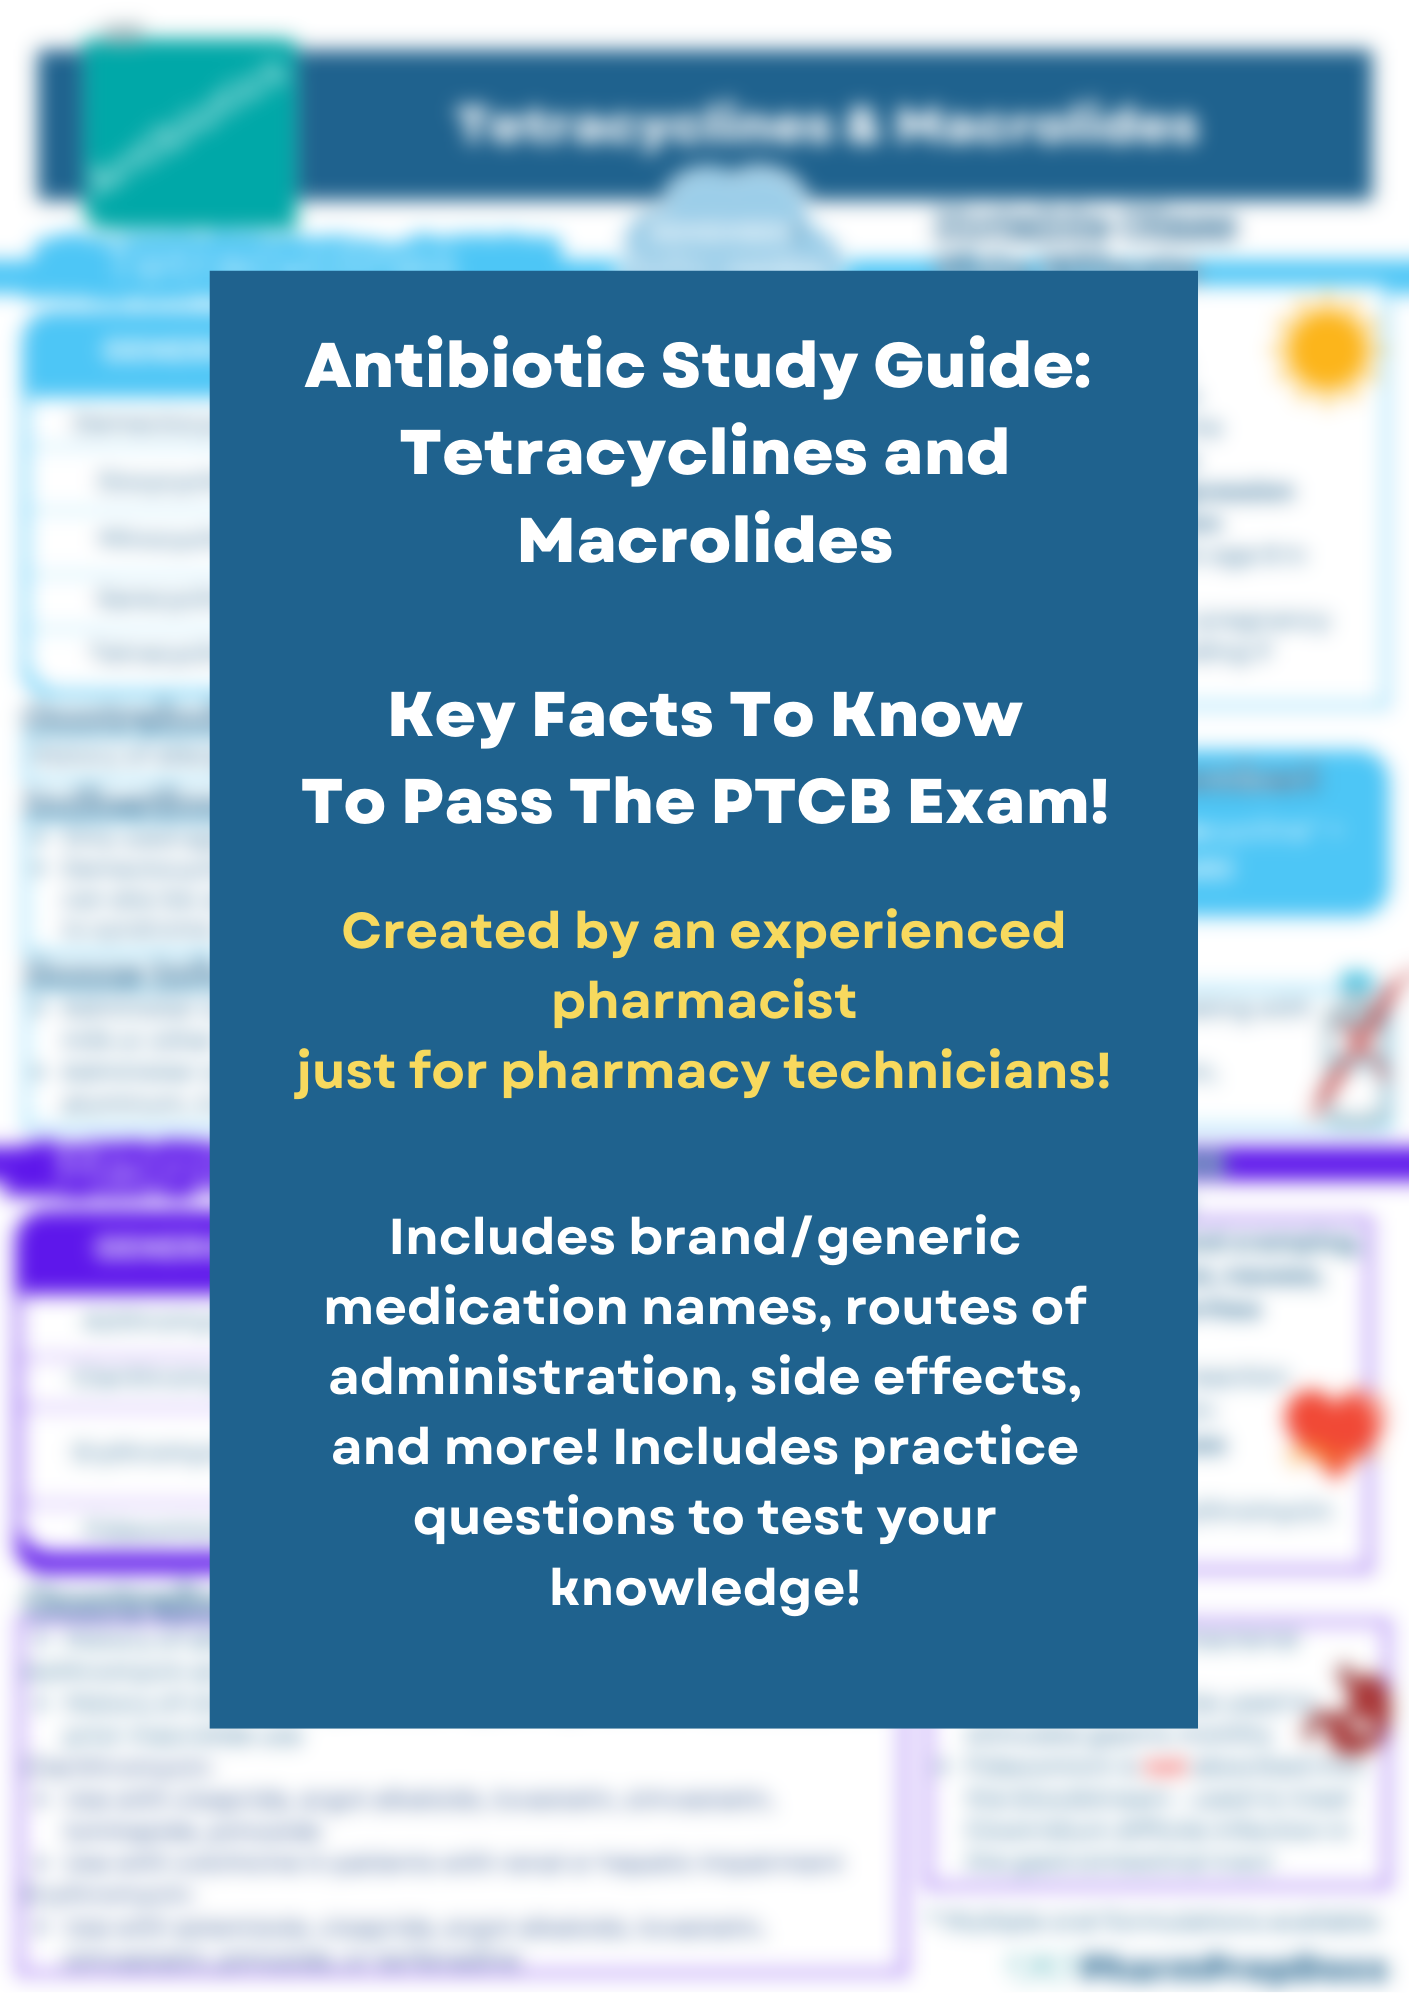 Antibiotic Study Guide: Tetracyclines and Macrolides